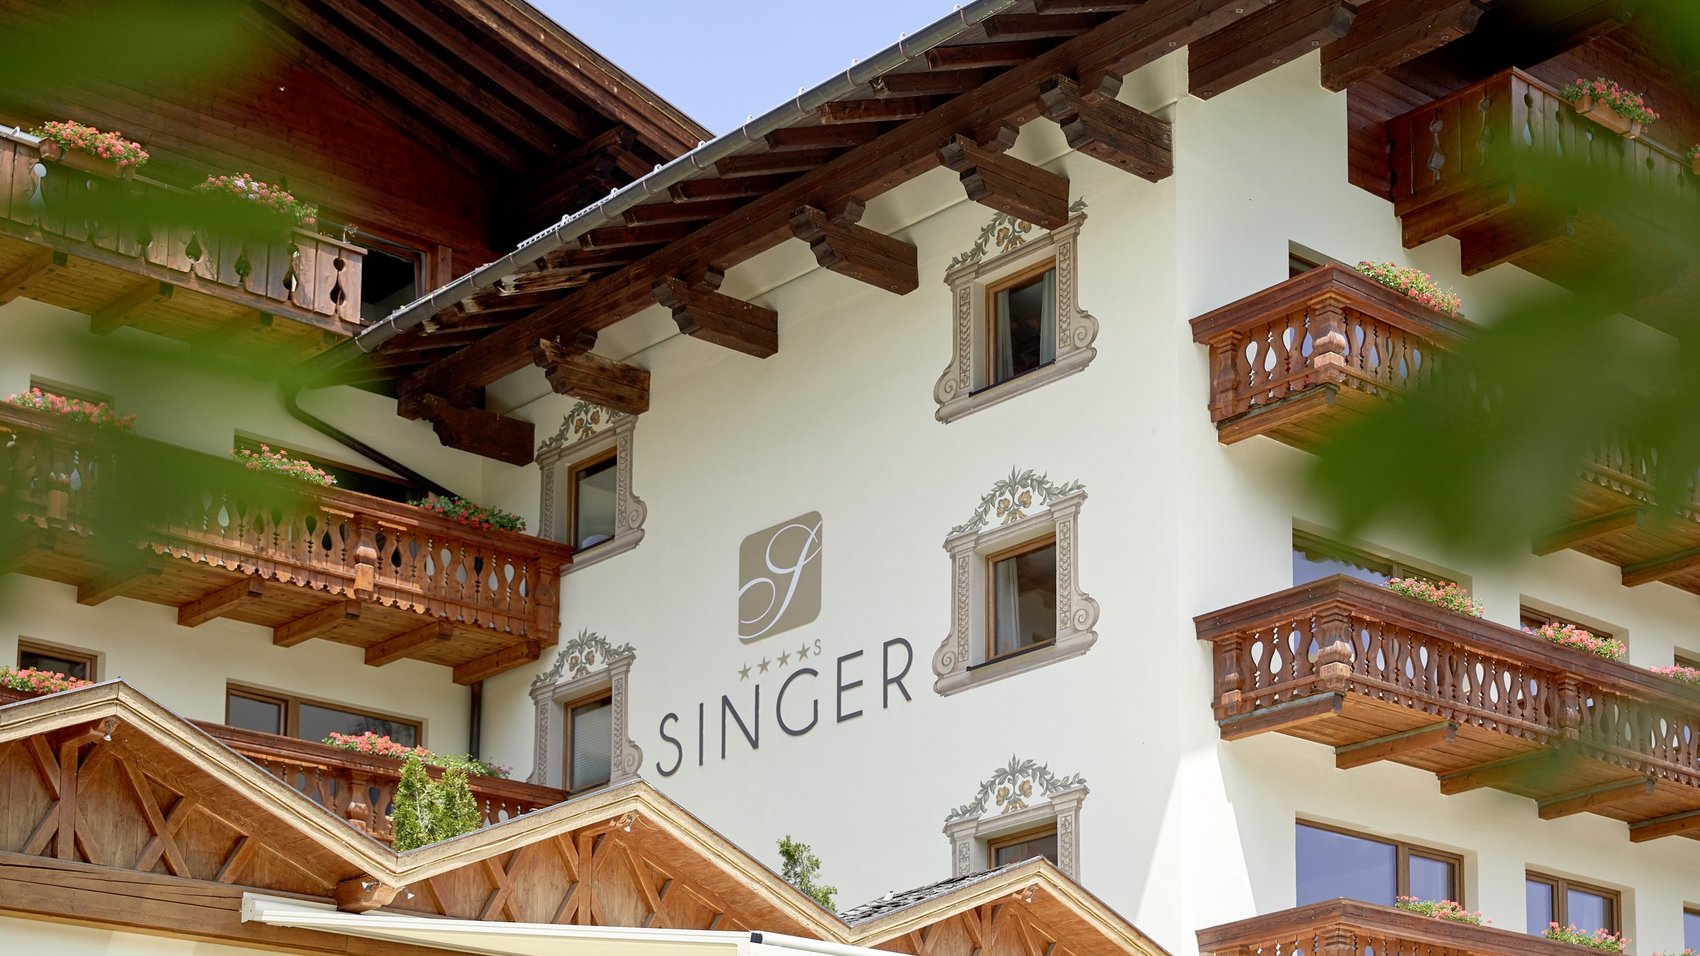 Are you looking for a 4-star hotel in Tyrol?